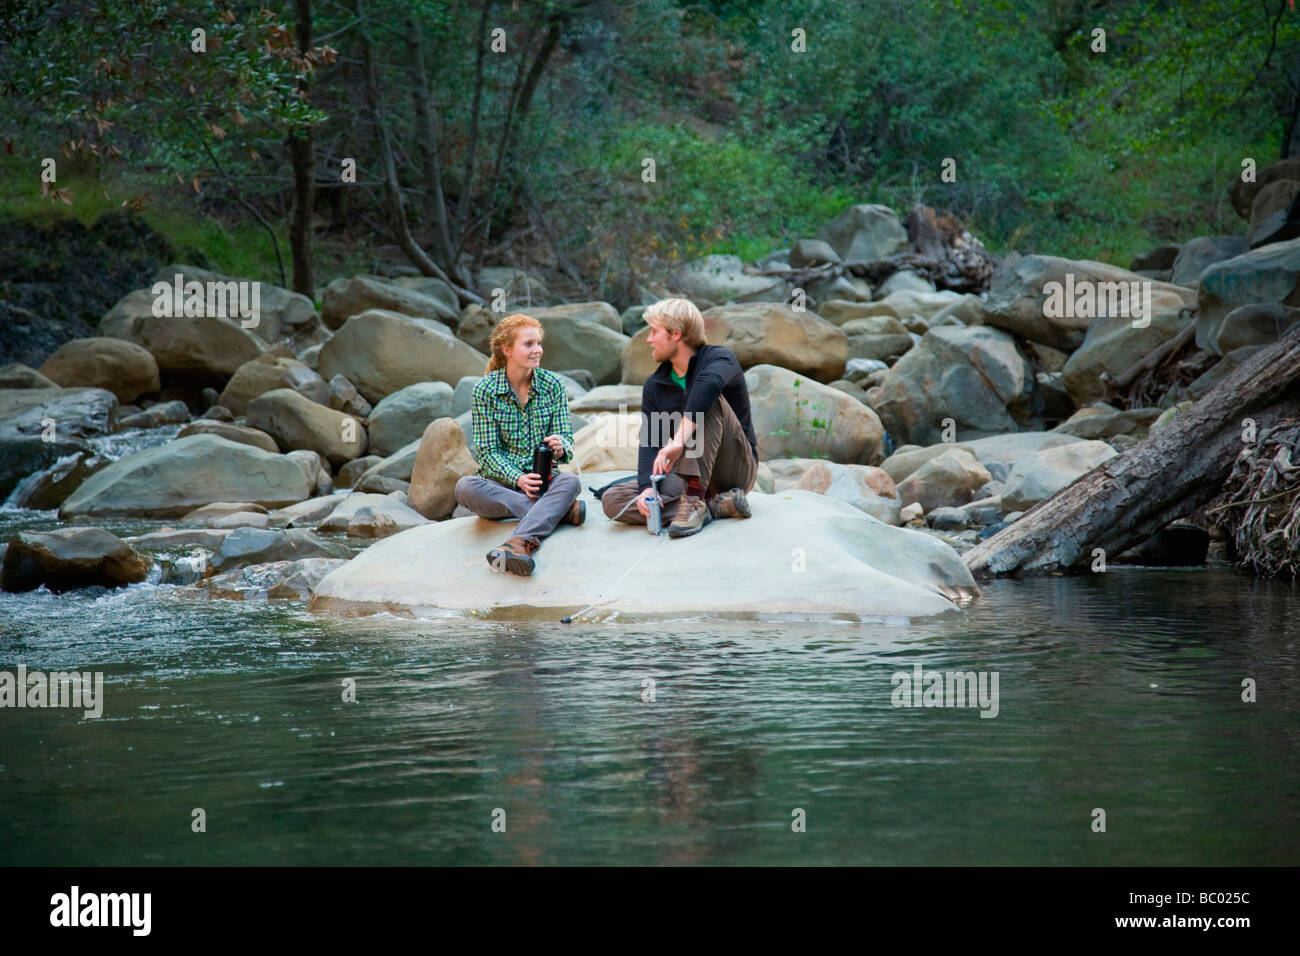 Backpackers taking a break at a river. Stock Photo